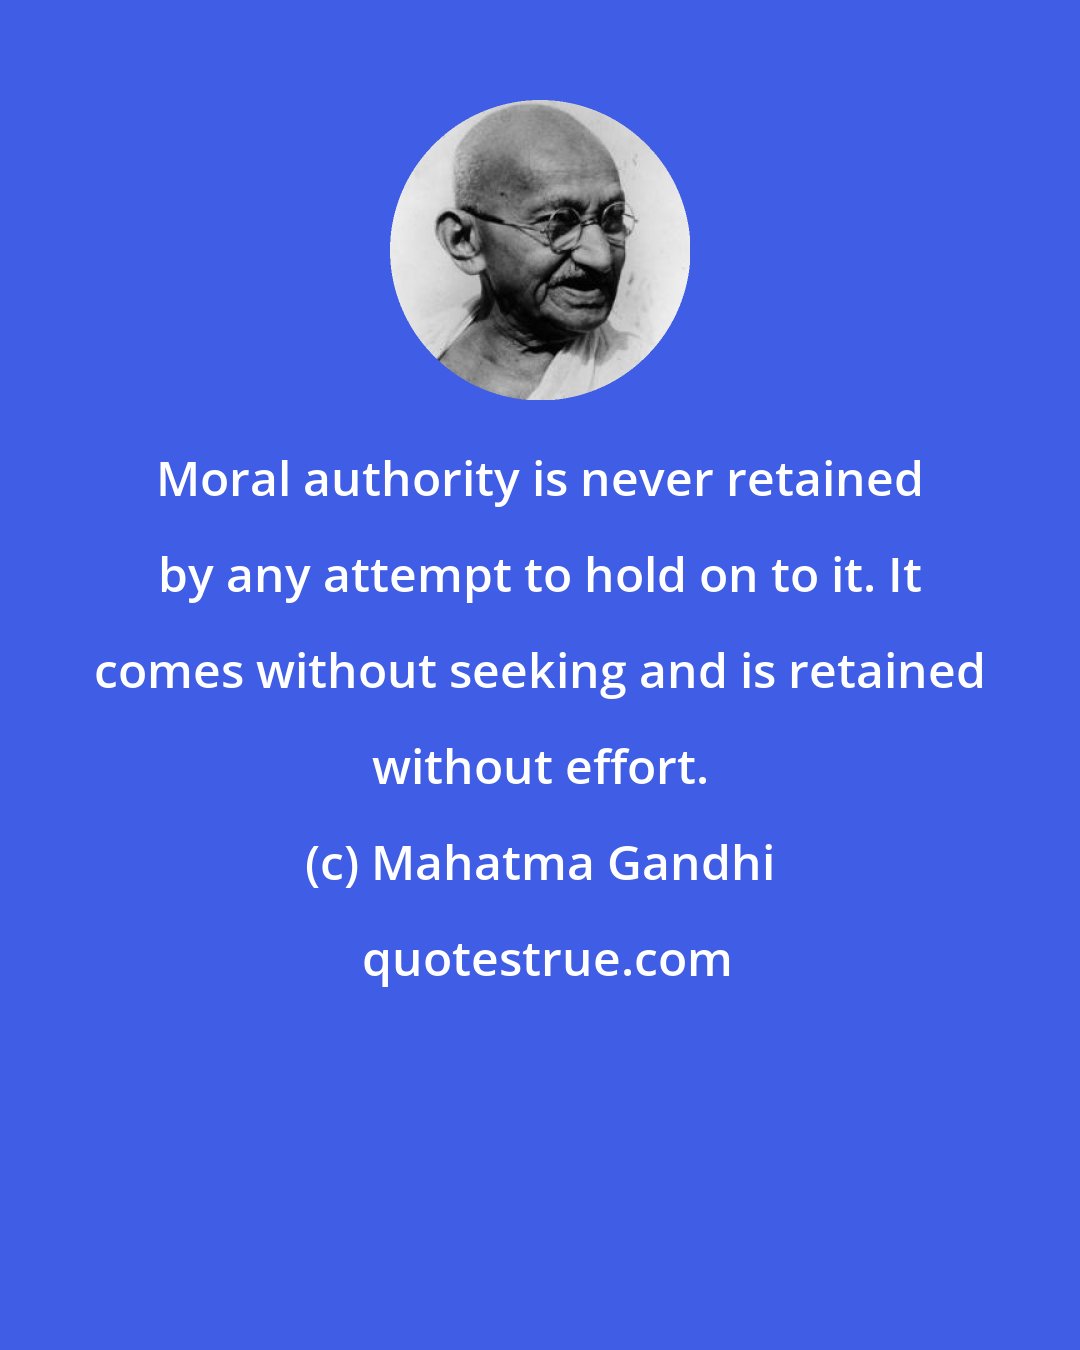 Mahatma Gandhi: Moral authority is never retained by any attempt to hold on to it. It comes without seeking and is retained without effort.